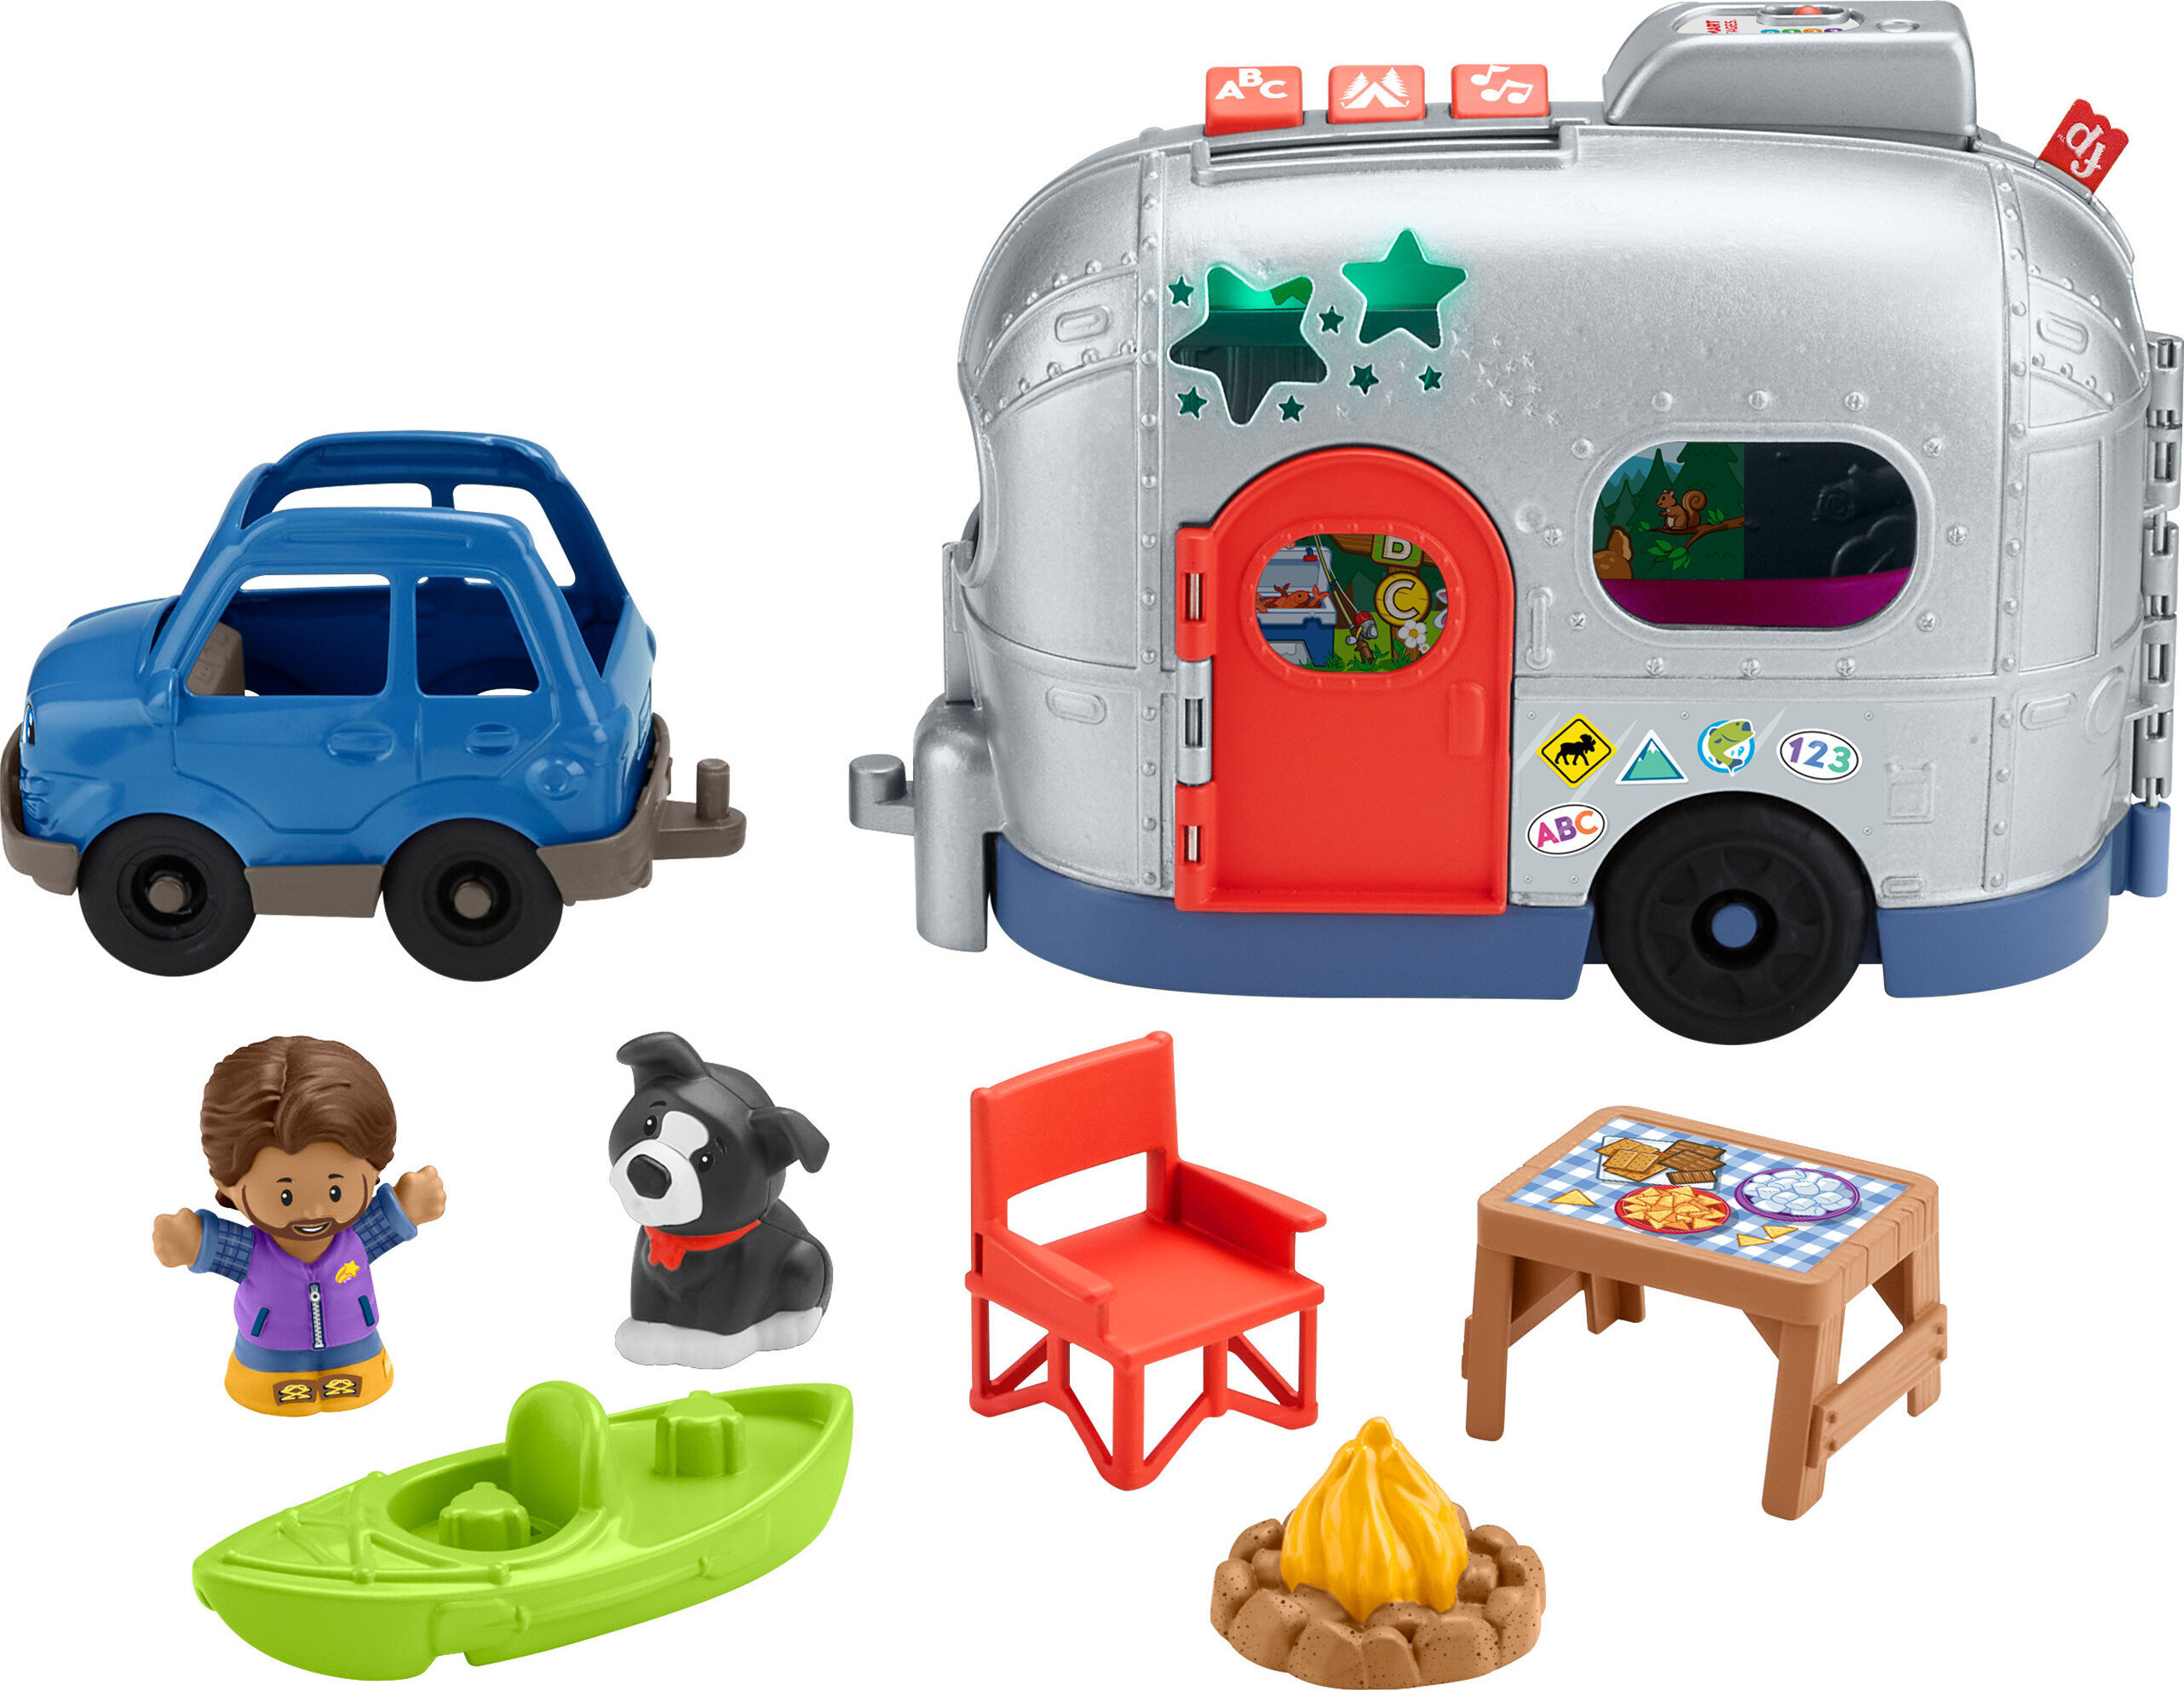 Fisher-Price Little People Light-up Learning Camper Electronic Toy RV for Toddlers, 8 Pieces - image 1 of 7